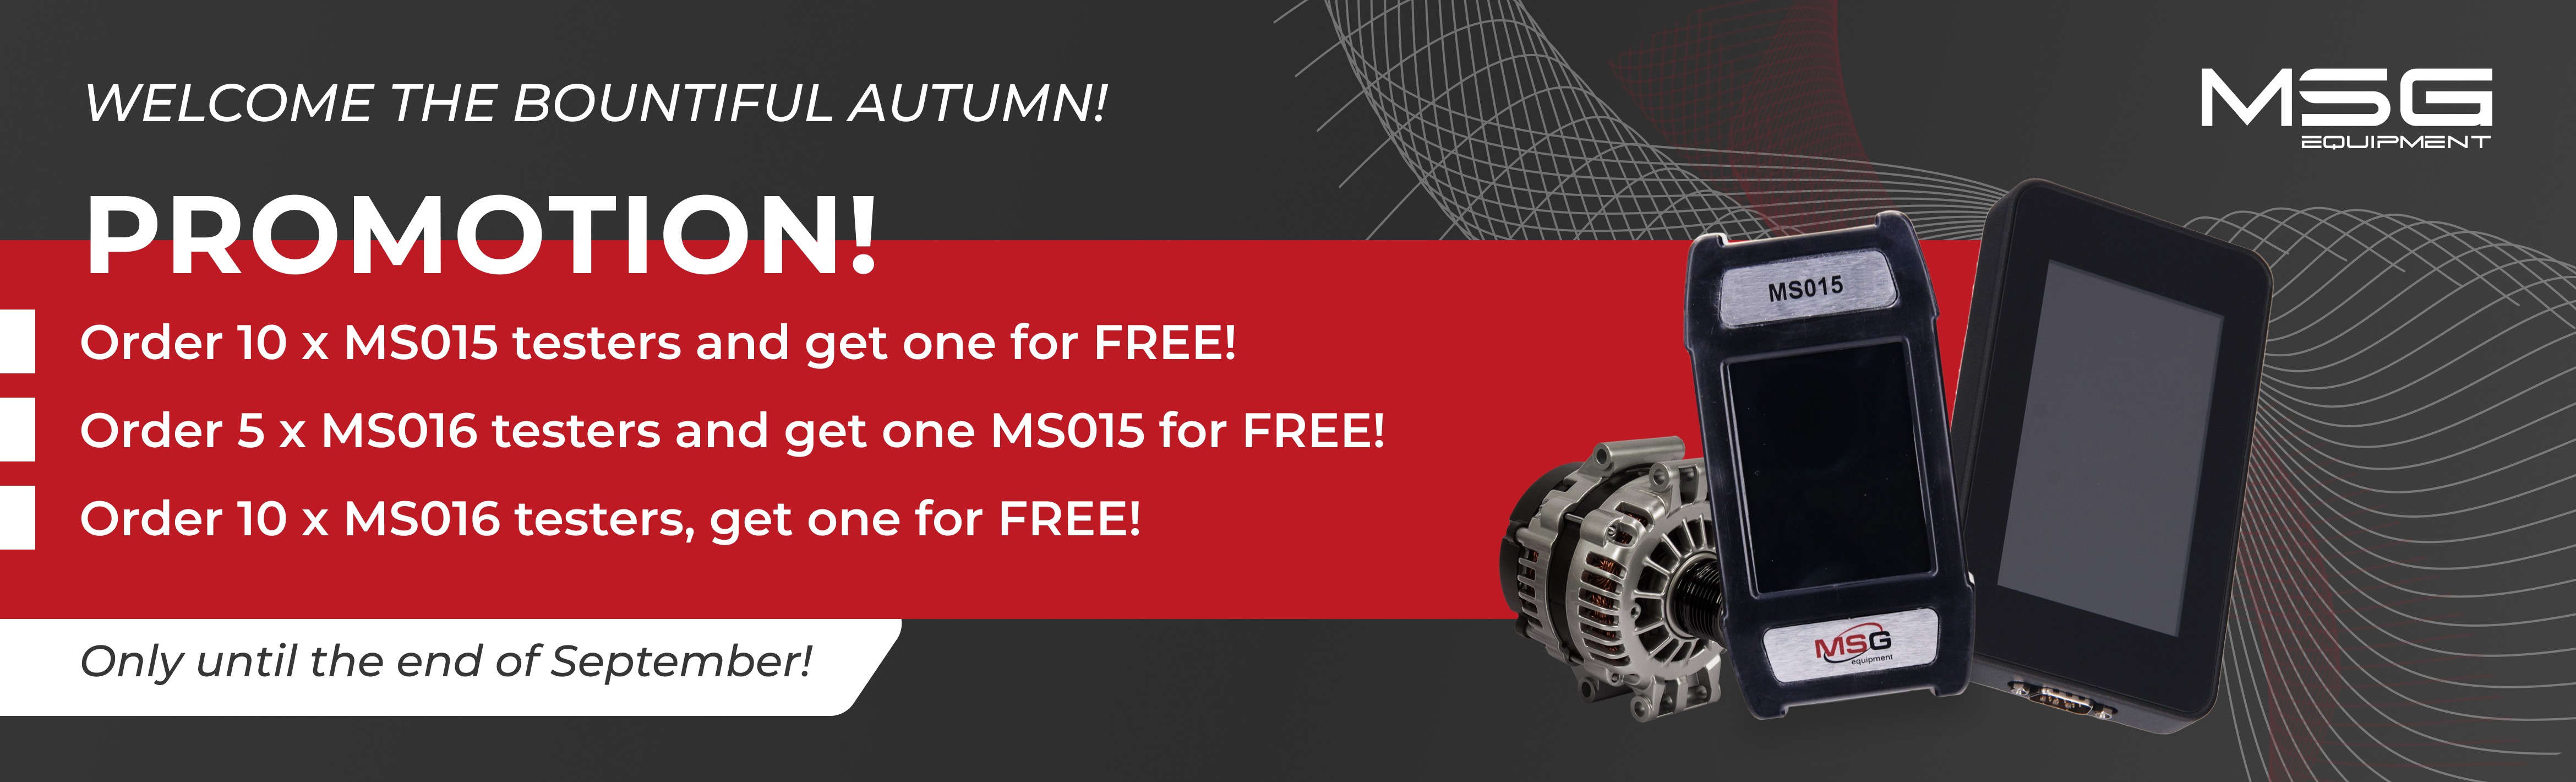 Promotion from MSG Equipment: an additional gift to the order